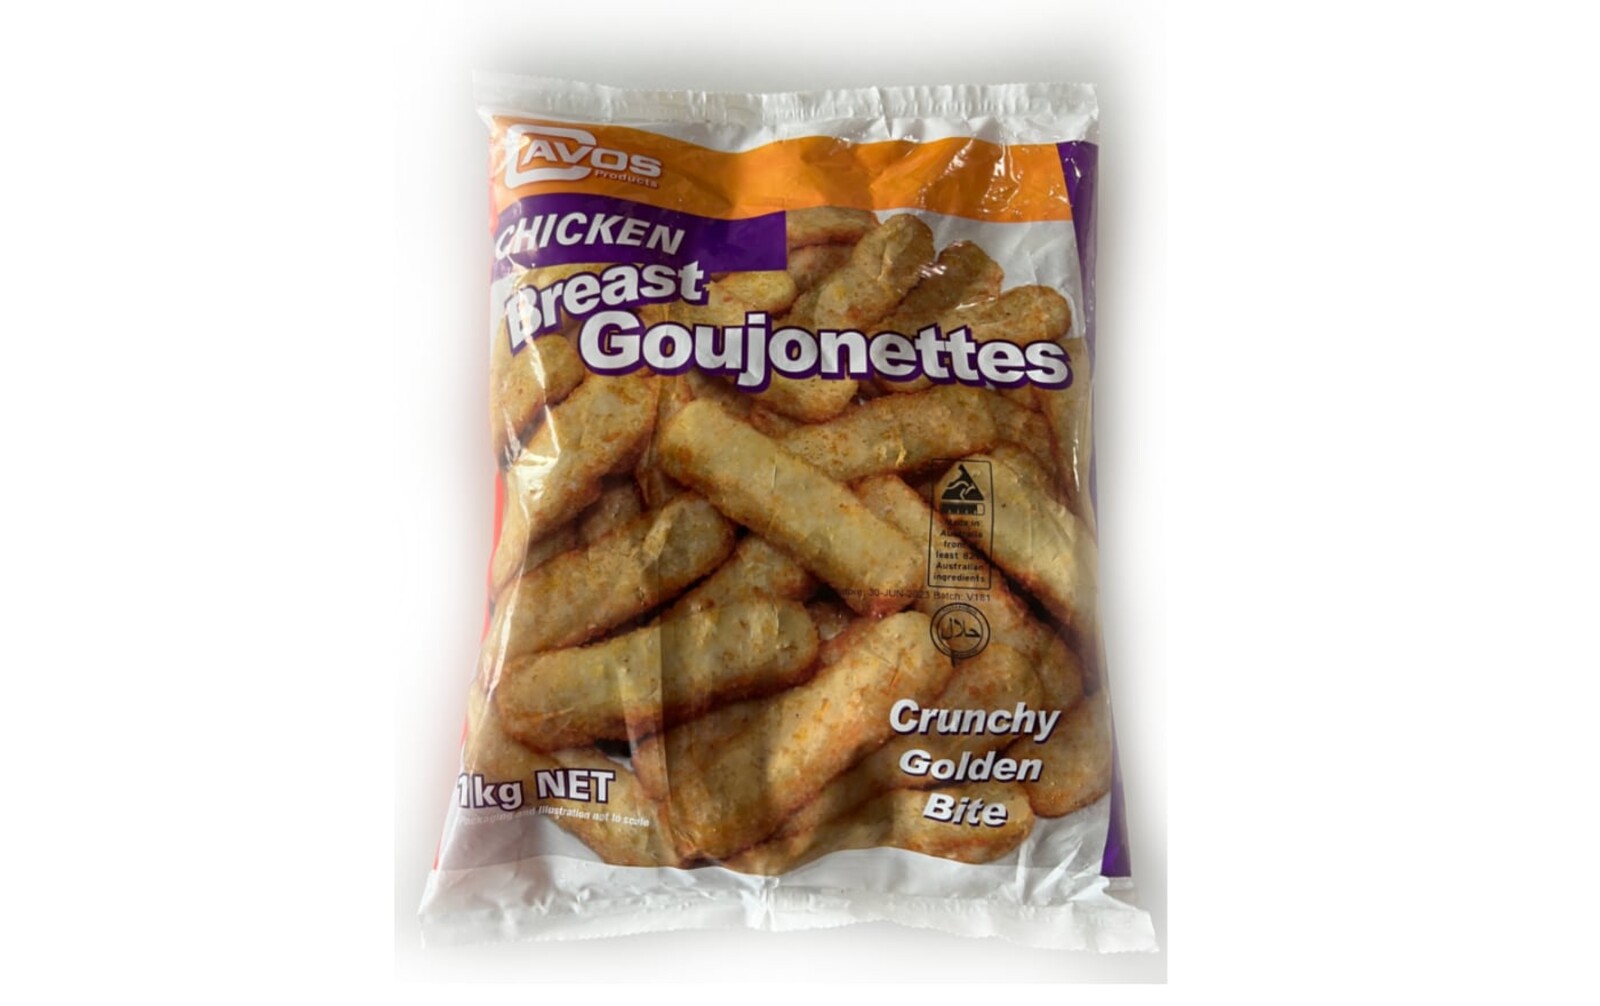 Cavos Products Chicken Breast Goujonettes